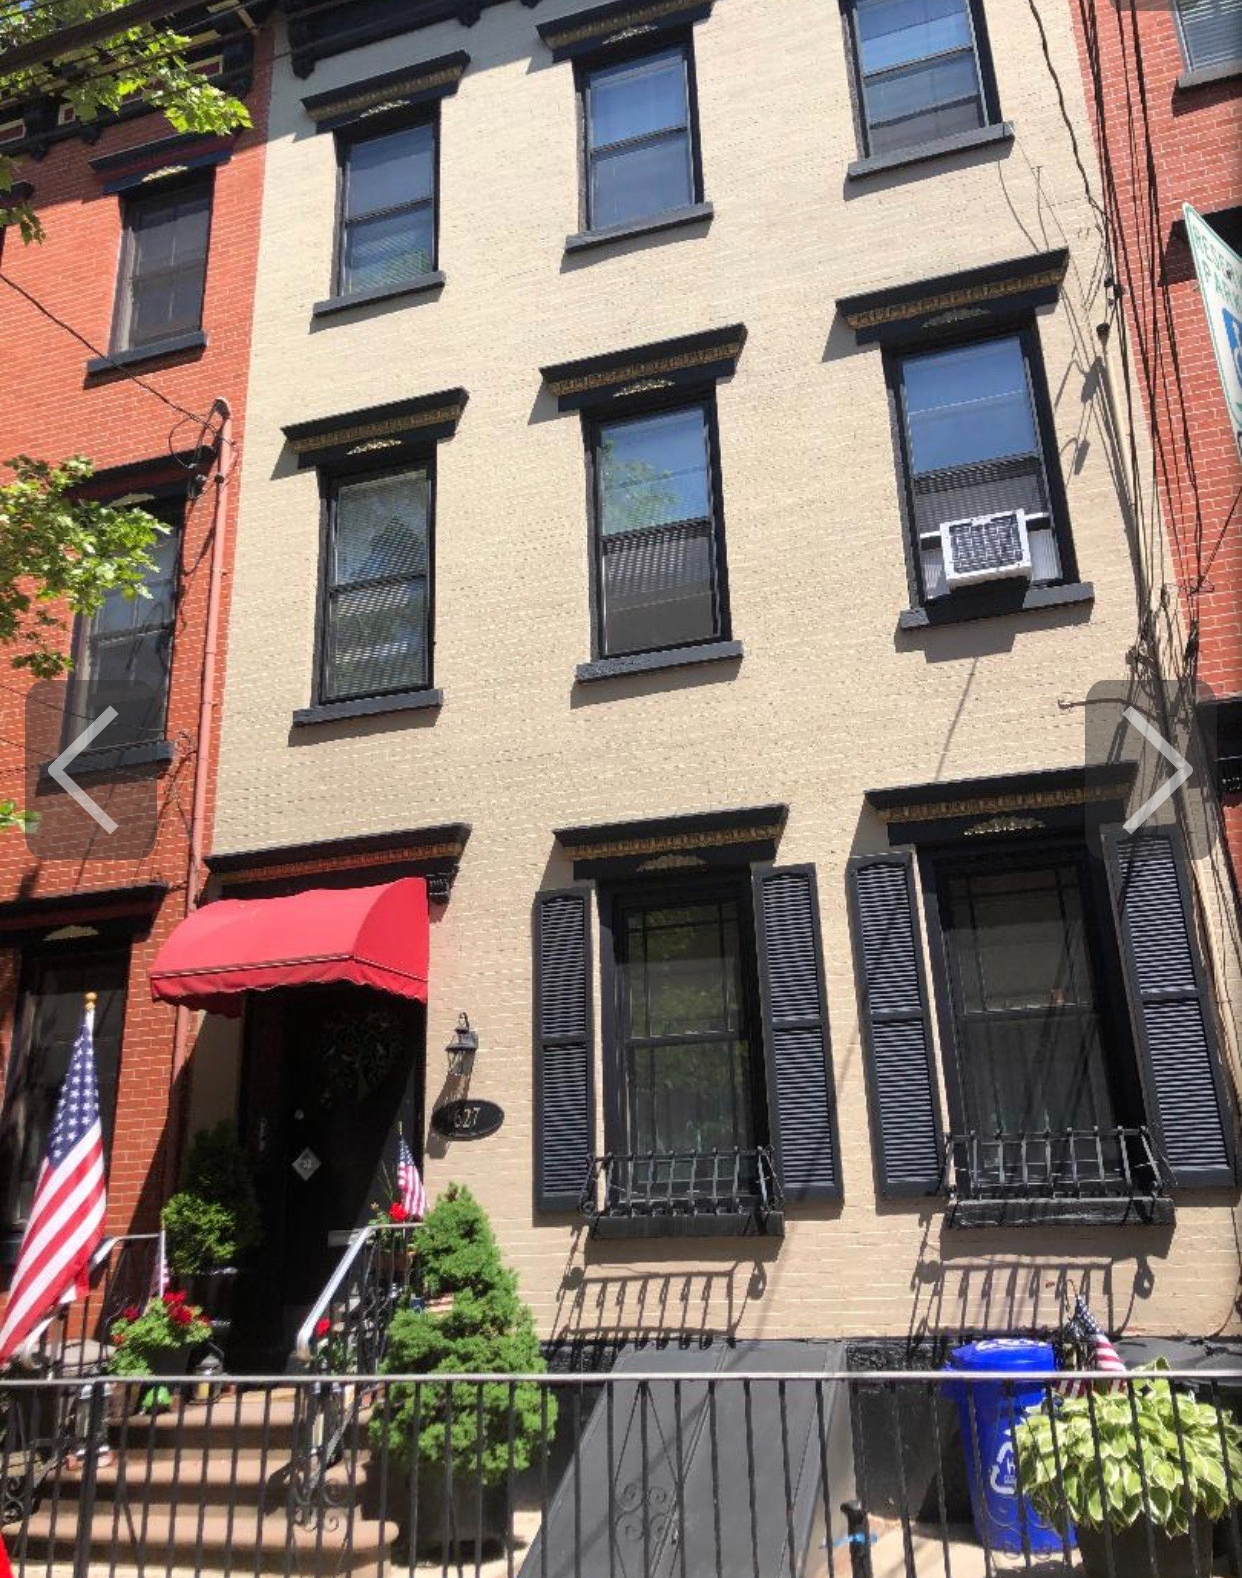 One bedroom, 1 bath apartment,  ideal for one professional person. In a private home with private access. No Pets. Available October 1, possibly sooner. Vacant and easy to show. Simply contact Stephanie via text at 201-310-8199.
